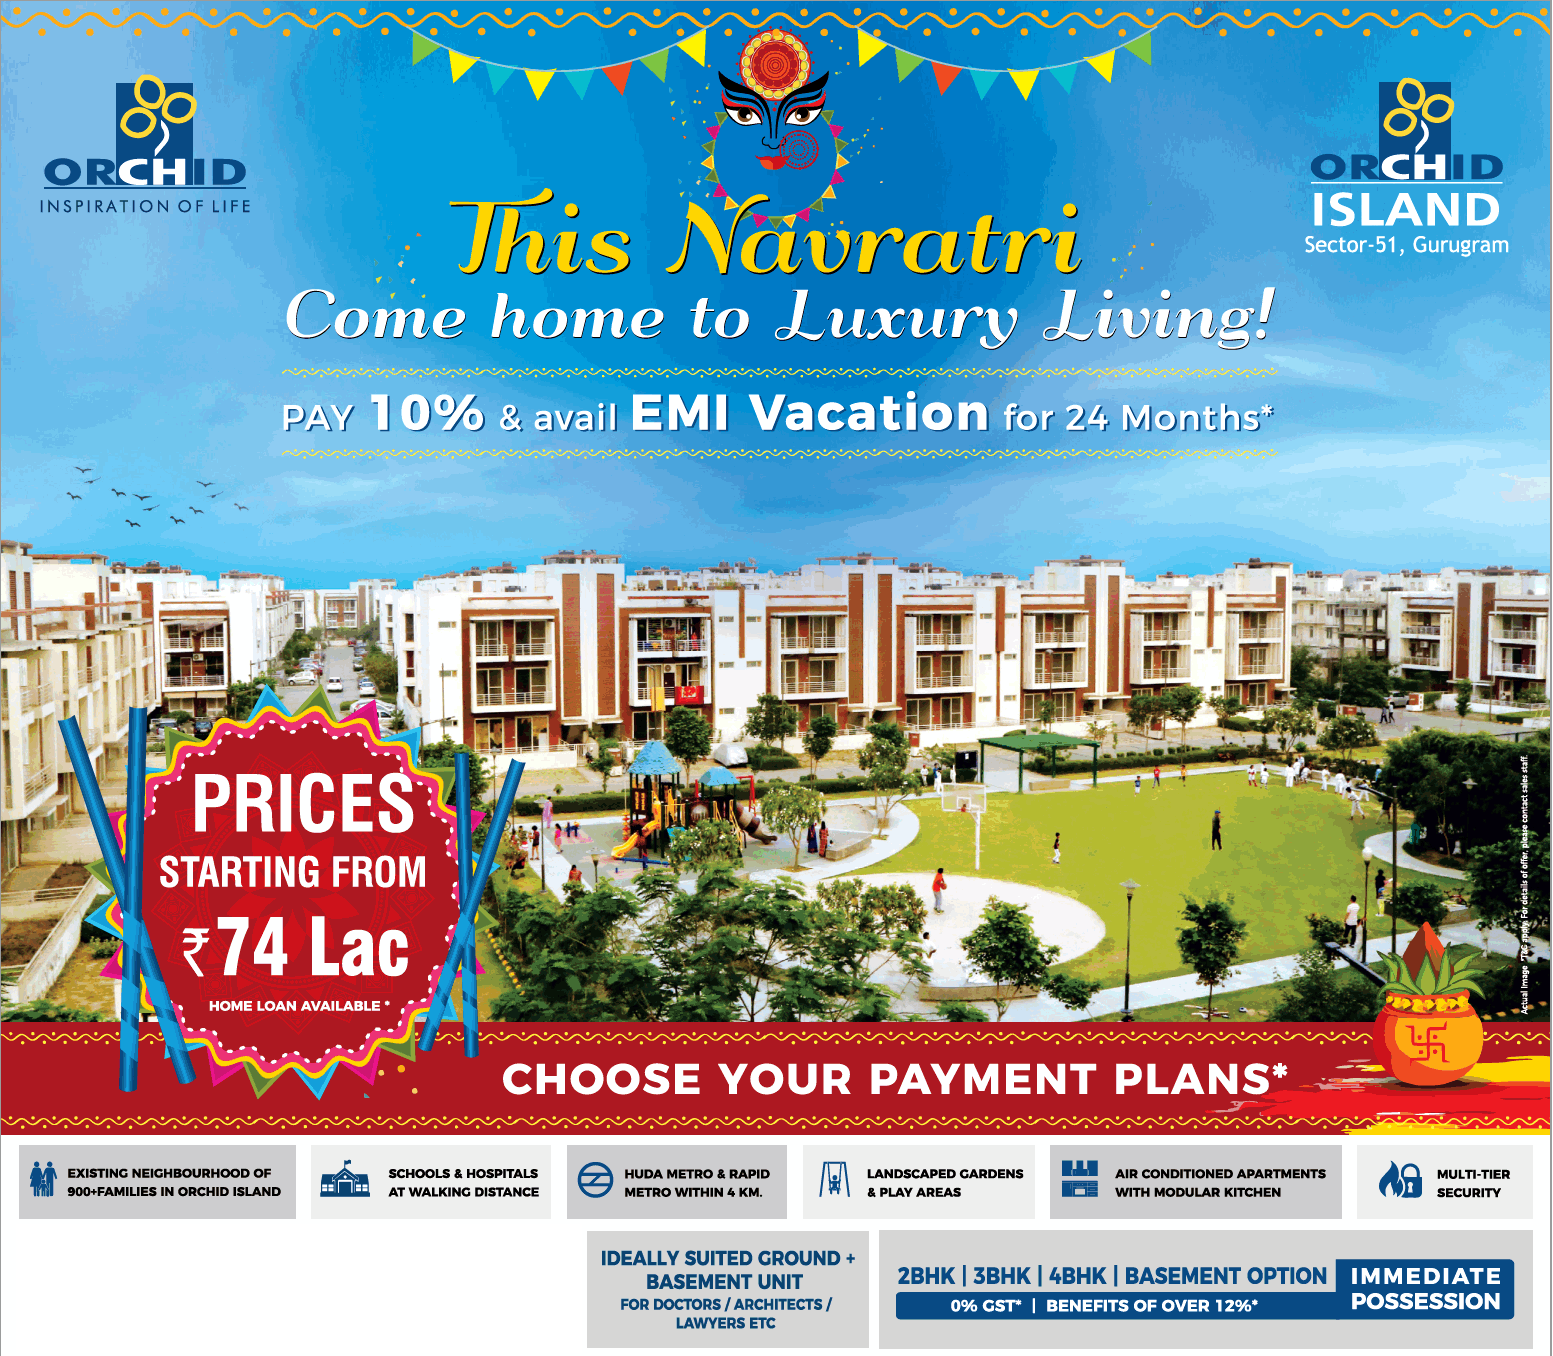 Pay 10% & avail EMI vacation for 24 months at Orchid Island in Gurgaon Update